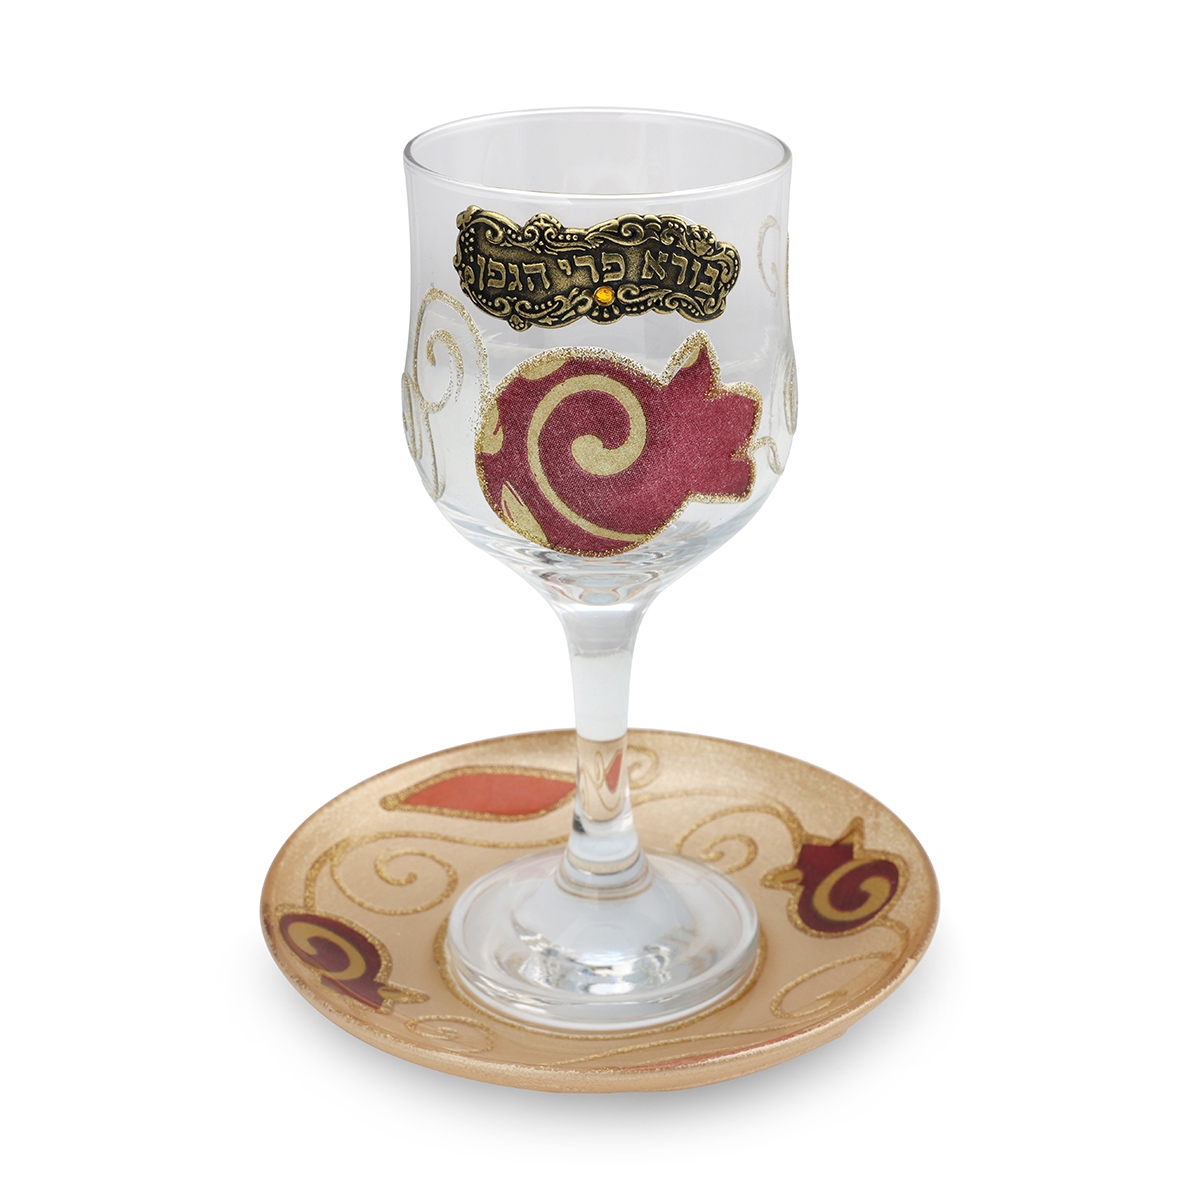 Lily Art Hand Painted Kiddush Cup With Red Pomegranate Design - 1